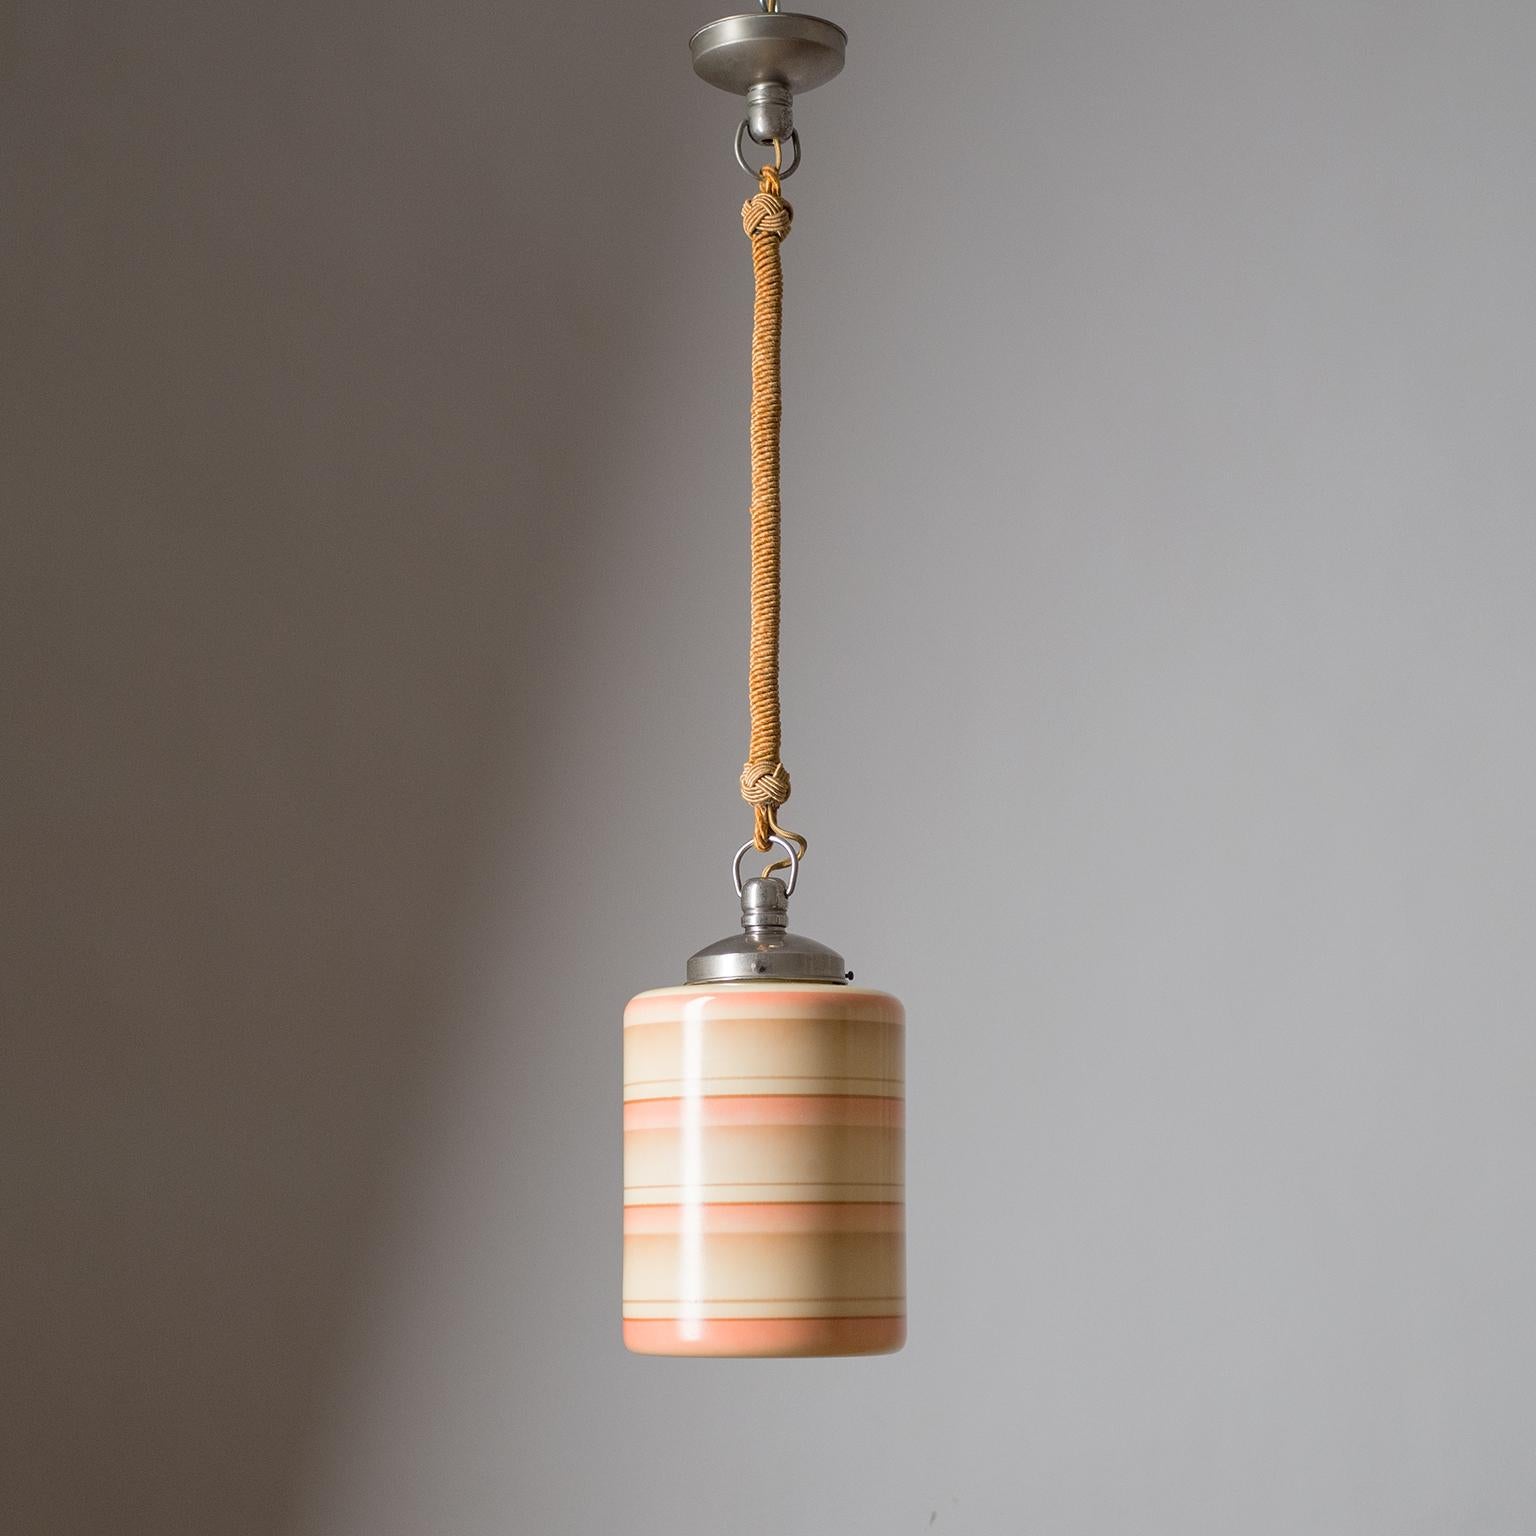 Rare Art Deco pendant or lantern, circa 1930. Suspended by a twisted cord is a cylindrical ivory-colored glass diffuser enameled with alternating stripes and gradients. Fine original condition with some light patina on the nickeled brass hardware.